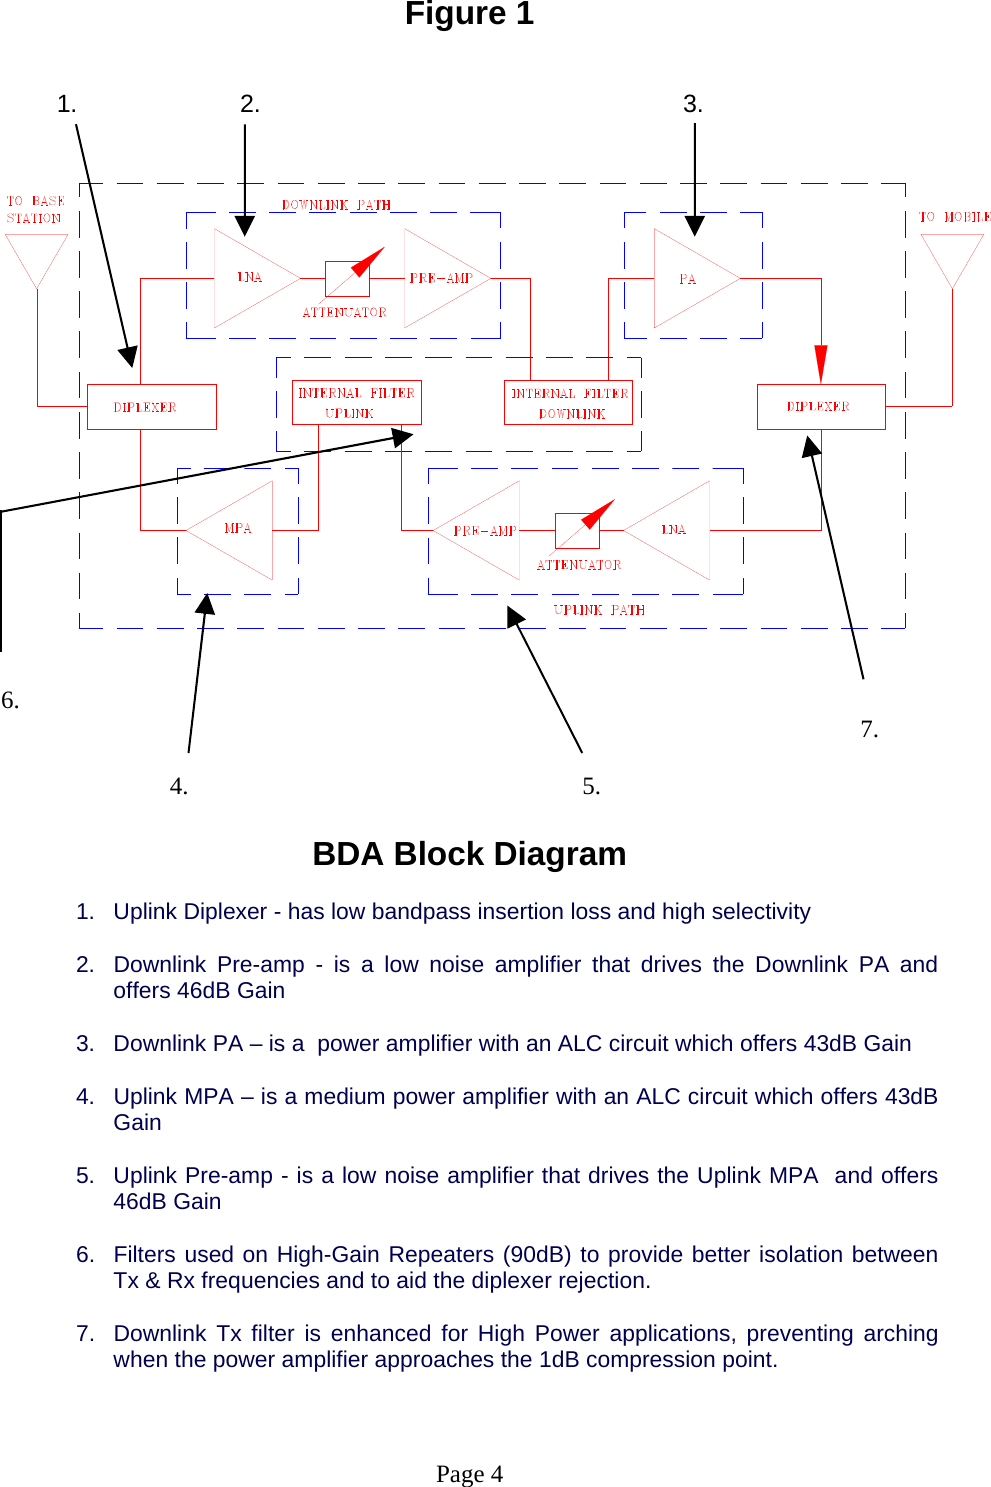 Figure 1            1.         2.       3.            6.                                                  7.                       4.                   5.  BDA Block Diagram  1.  Uplink Diplexer - has low bandpass insertion loss and high selectivity   2.  Downlink Pre-amp - is a low noise amplifier that drives the Downlink PA and offers 46dB Gain  3.  Downlink PA – is a  power amplifier with an ALC circuit which offers 43dB Gain  4.  Uplink MPA – is a medium power amplifier with an ALC circuit which offers 43dB Gain  5.  Uplink Pre-amp - is a low noise amplifier that drives the Uplink MPA  and offers 46dB Gain  6.  Filters used on High-Gain Repeaters (90dB) to provide better isolation between Tx &amp; Rx frequencies and to aid the diplexer rejection.  7.  Downlink Tx filter is enhanced for High Power applications, preventing arching when the power amplifier approaches the 1dB compression point.    Page 4 